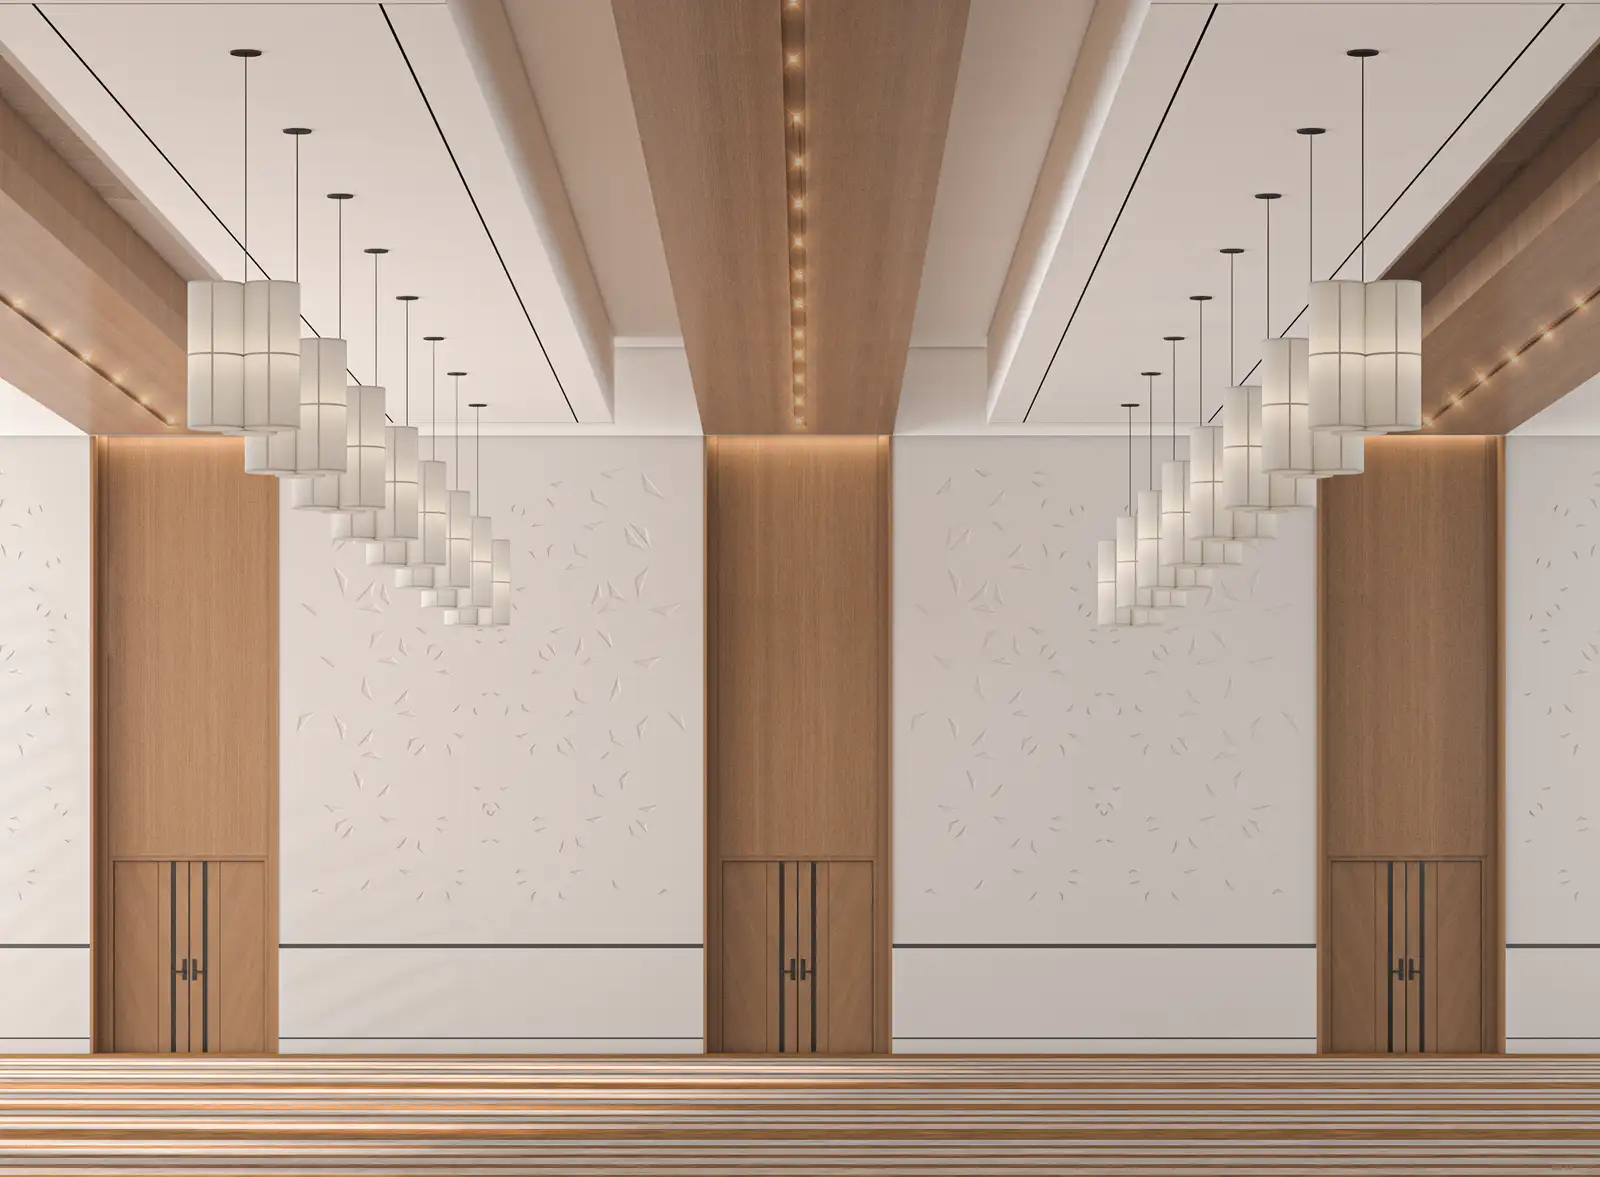 Contemporary mosque interior featuring elegant geometric pendant lighting, rich wooden architectural details, and serene white textured walls that create a peaceful and reflective spiritual space.